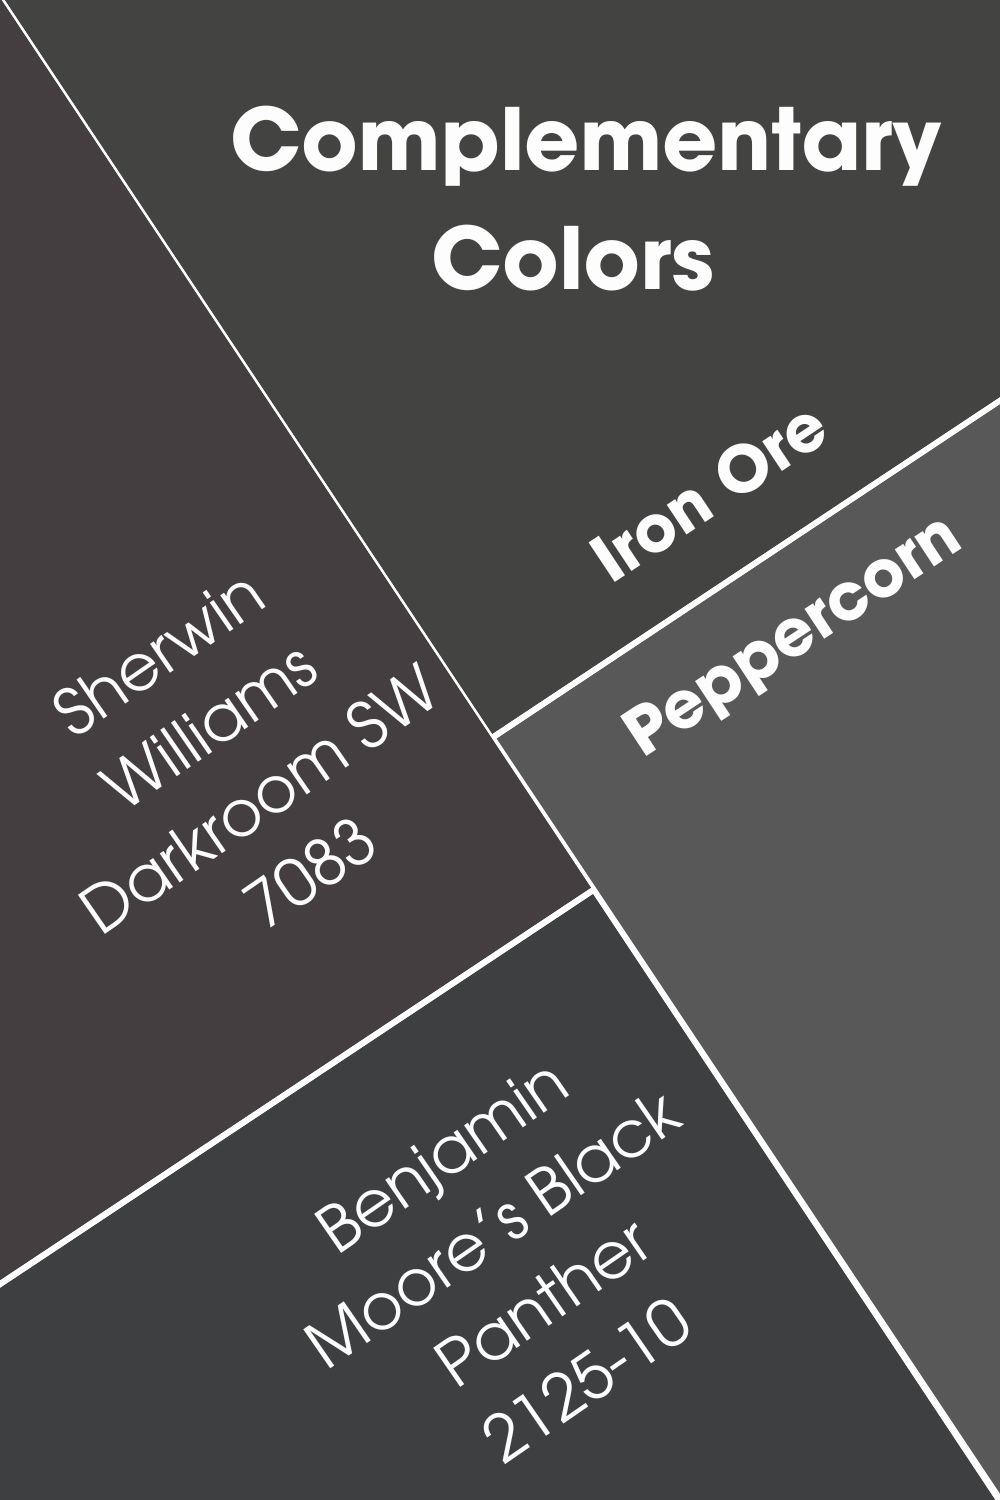 Sherwin Williams Iron Ore vs Peppercorn Complementary Colors